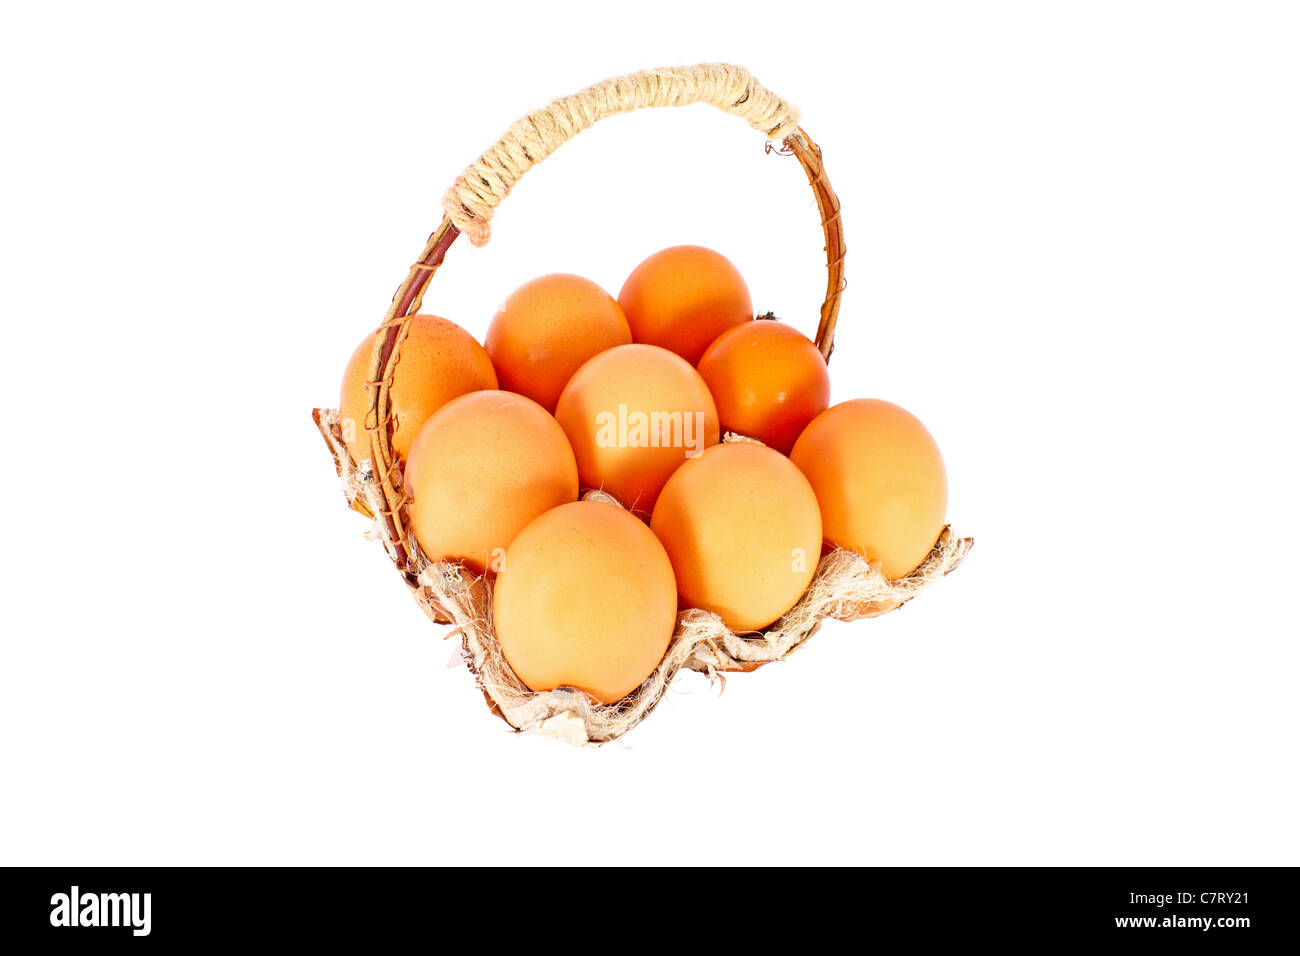 Chicken eggs in a basket made of natural materials, isolated Stock Photo